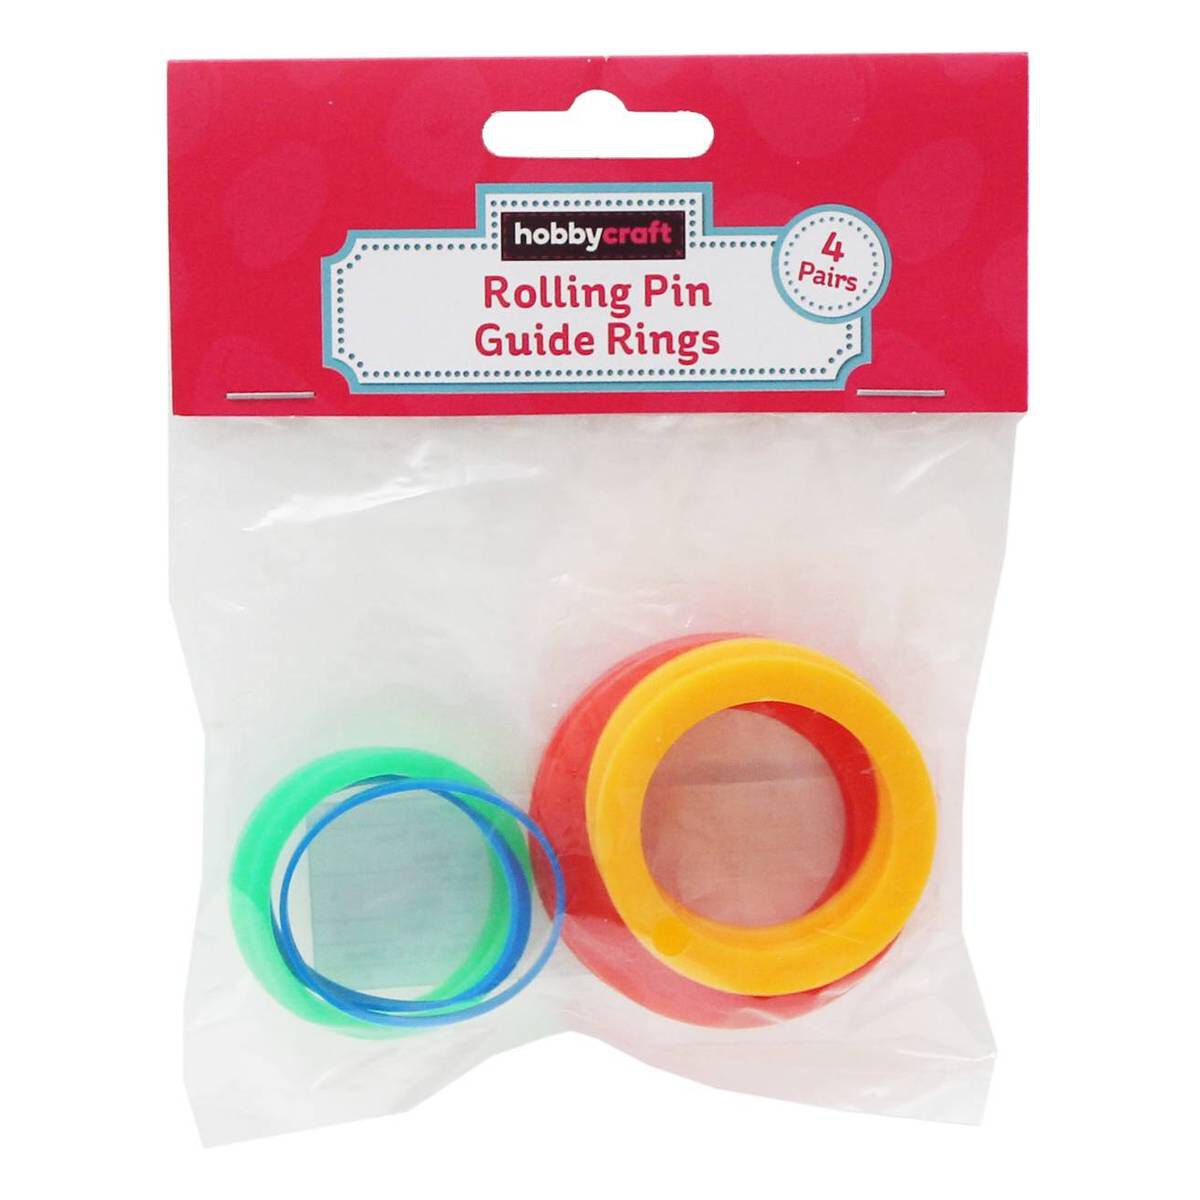 648804 1000 2  Rolling Pin Guide Rings 4 Pack ?q=80